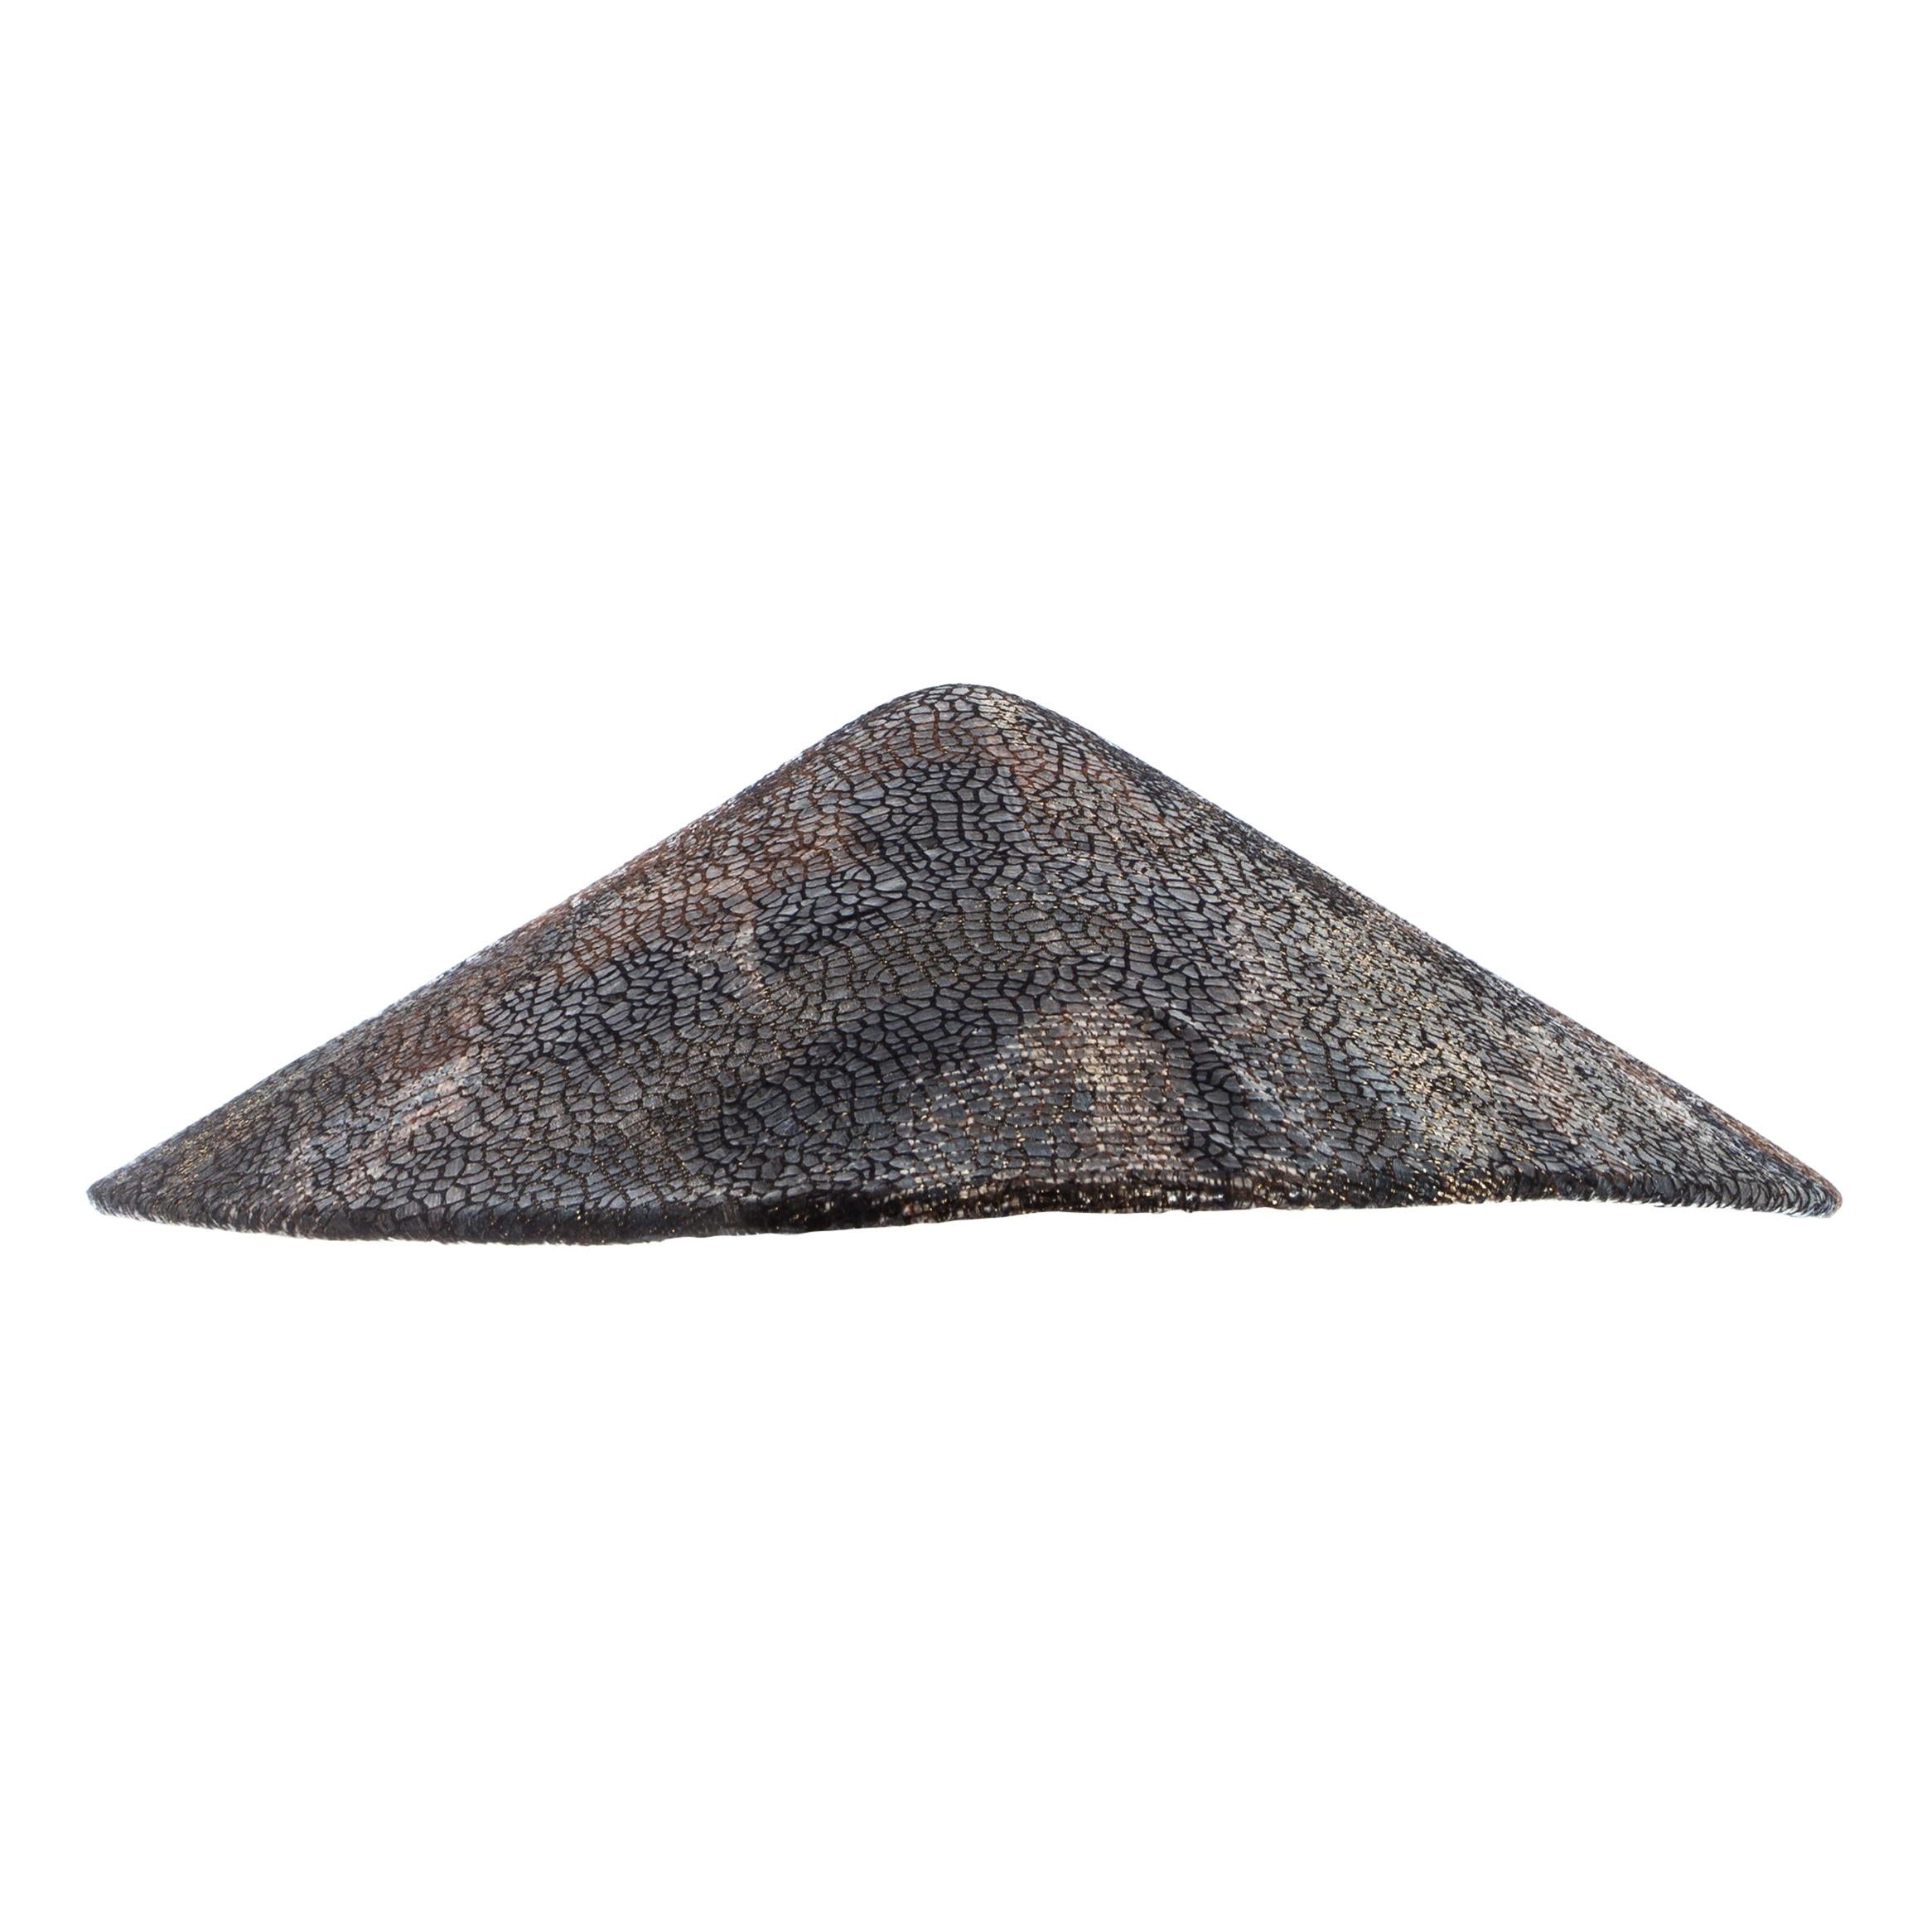 Chanel by Karl Lagerfeld, 'Paris-Shangai' bronze sequin conical hat, pf 2010